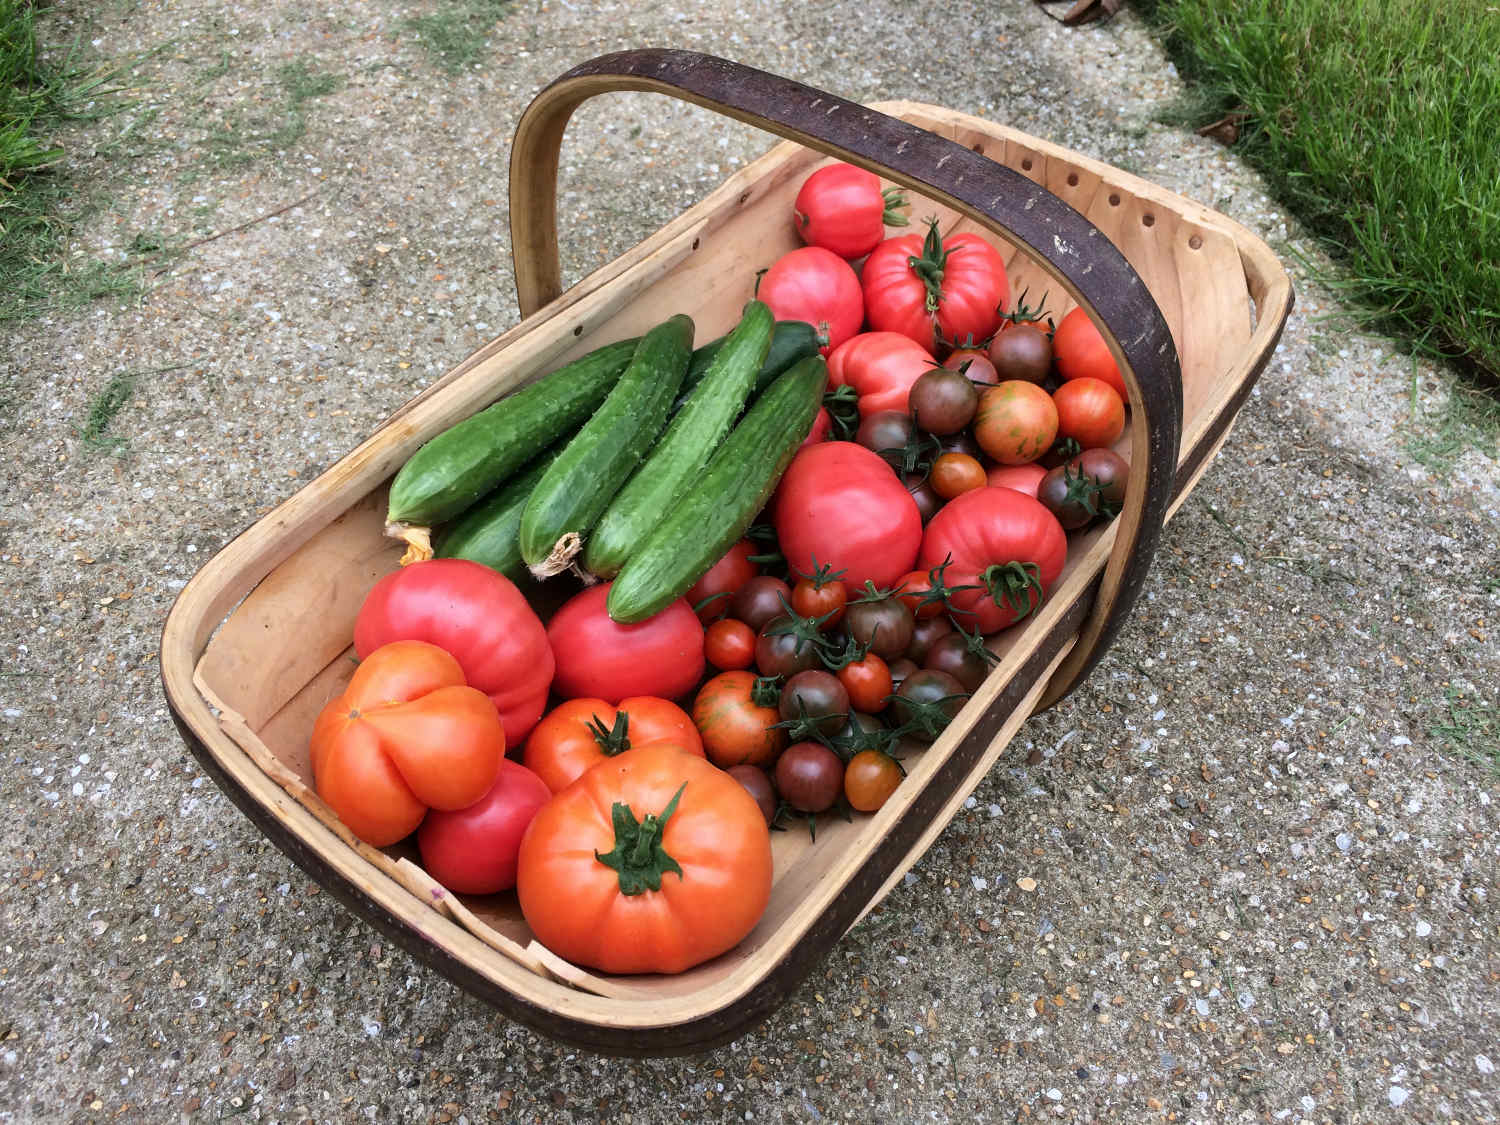 Image showing a tray of fresh garden fruit and vegetables.